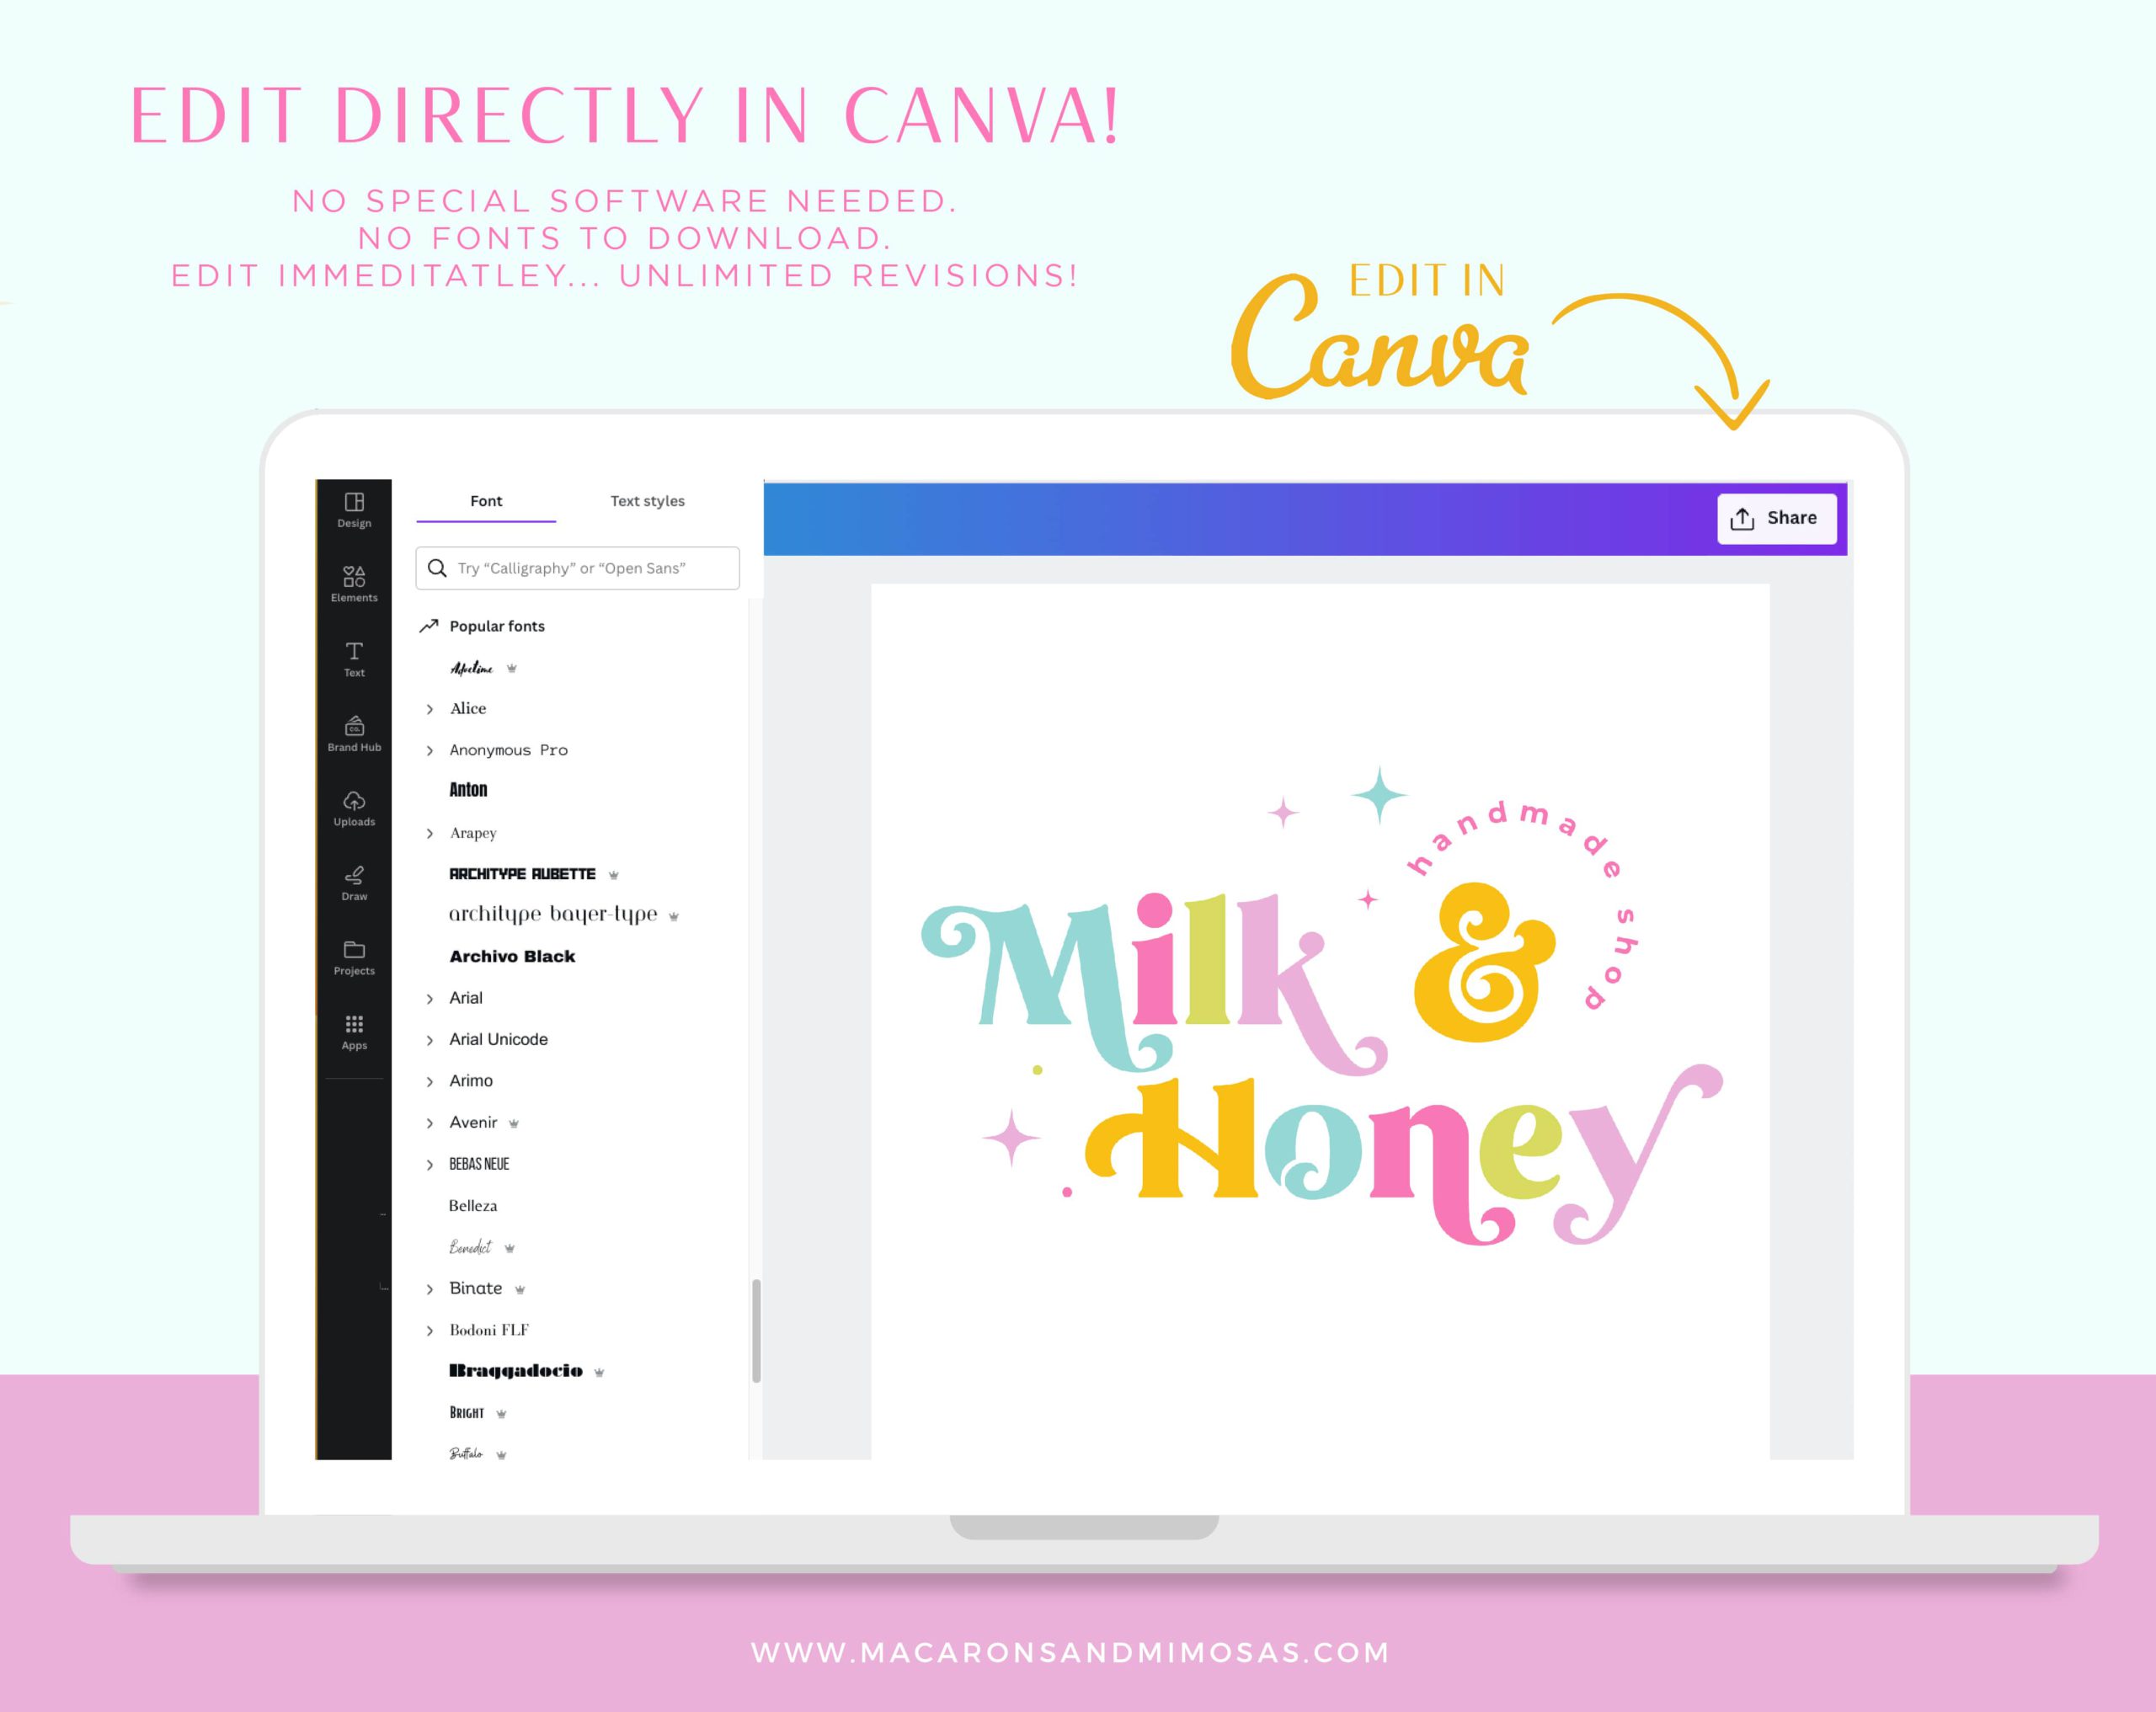 DIY Colorful Retro Canva Logo Template Kit with Semi Custom colorful logo Brand Board template, Rose gold Stock Photos suggestions, and more! 